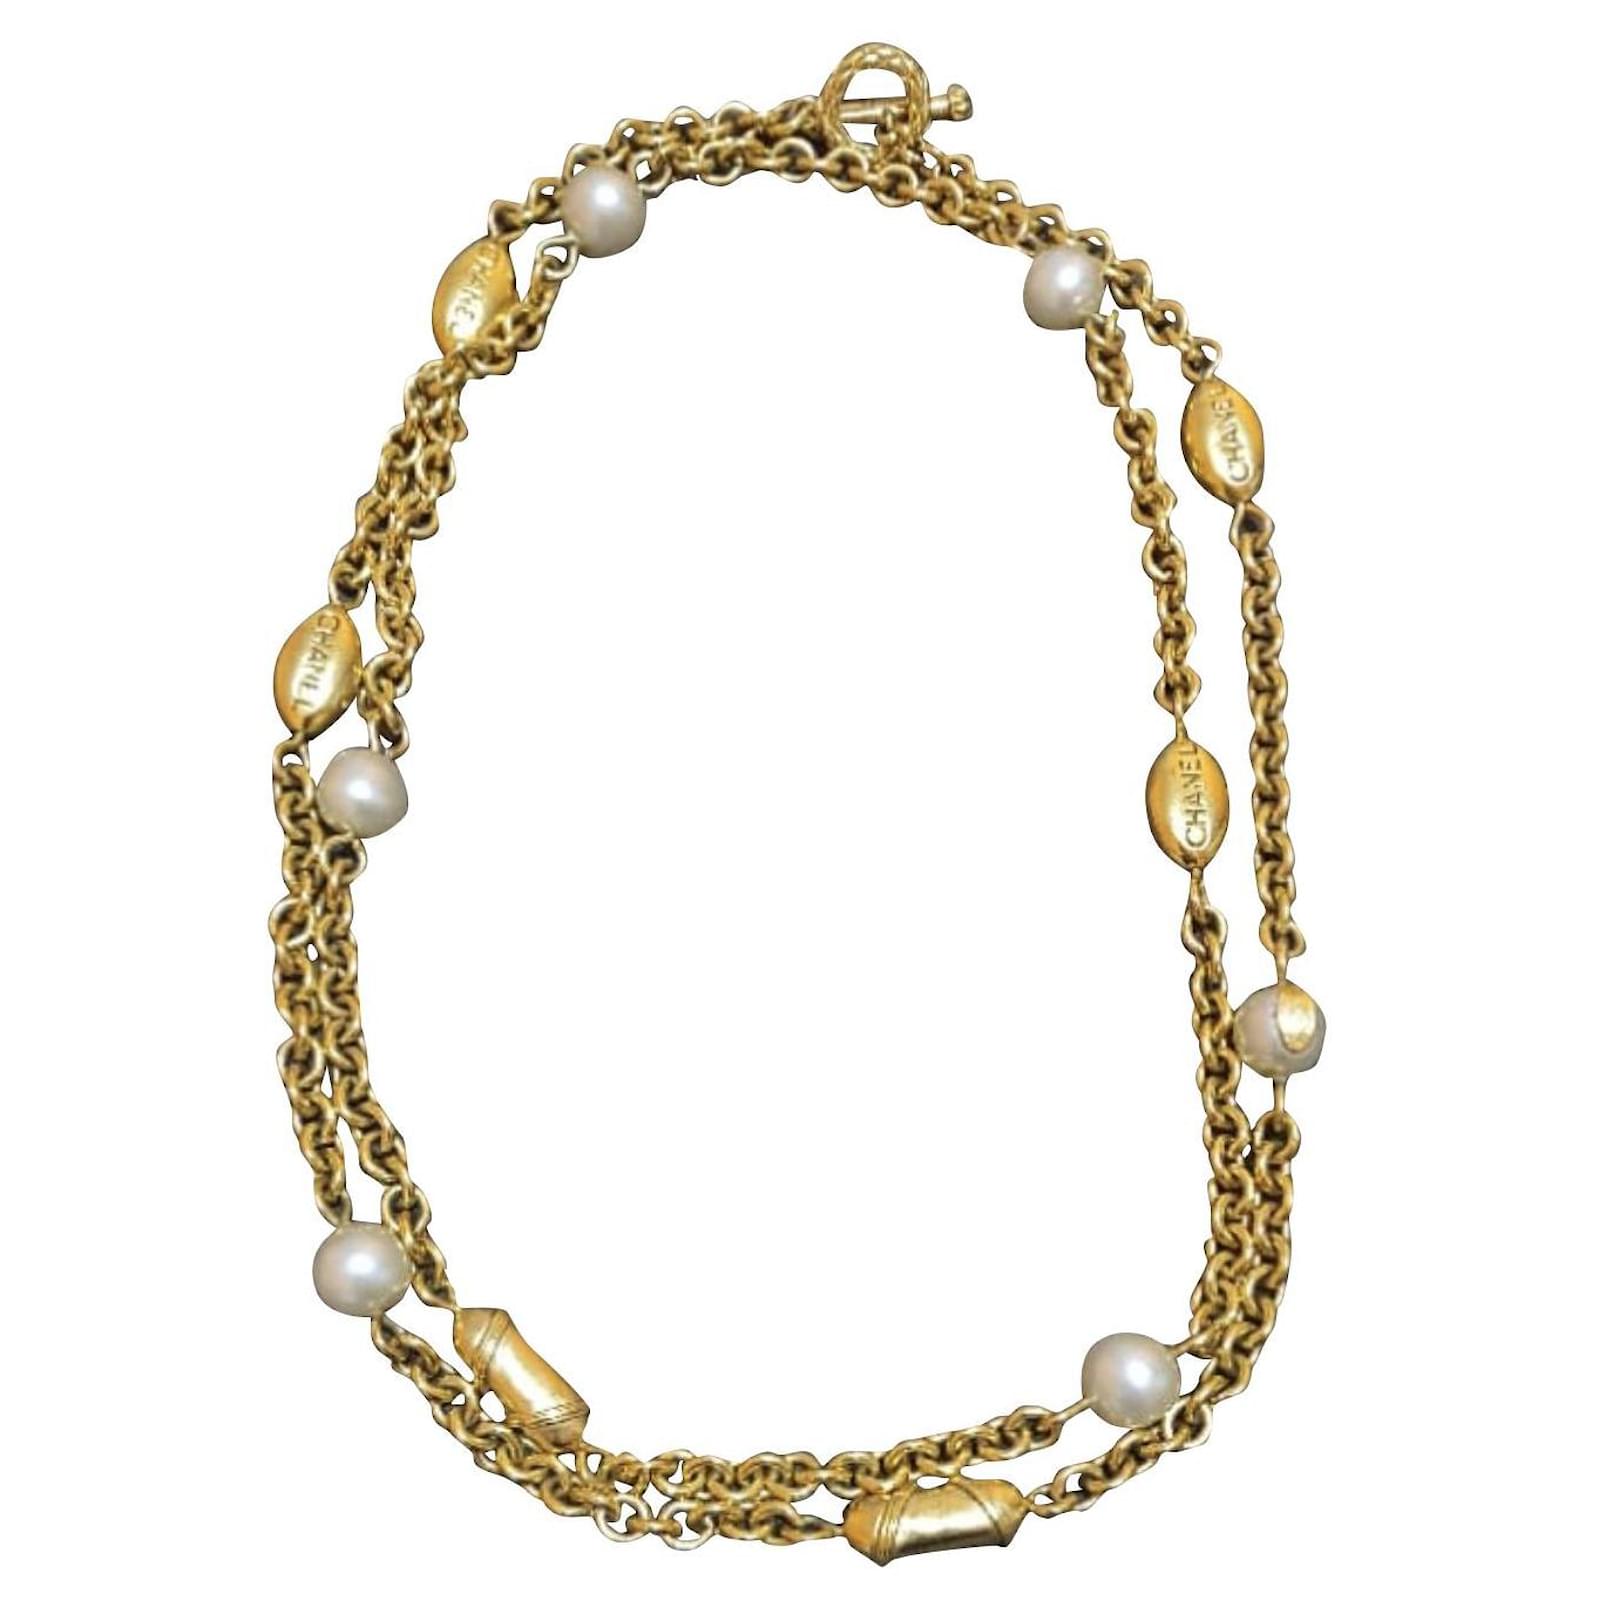 Chanel Vintage Pearl Charm Choker Necklace